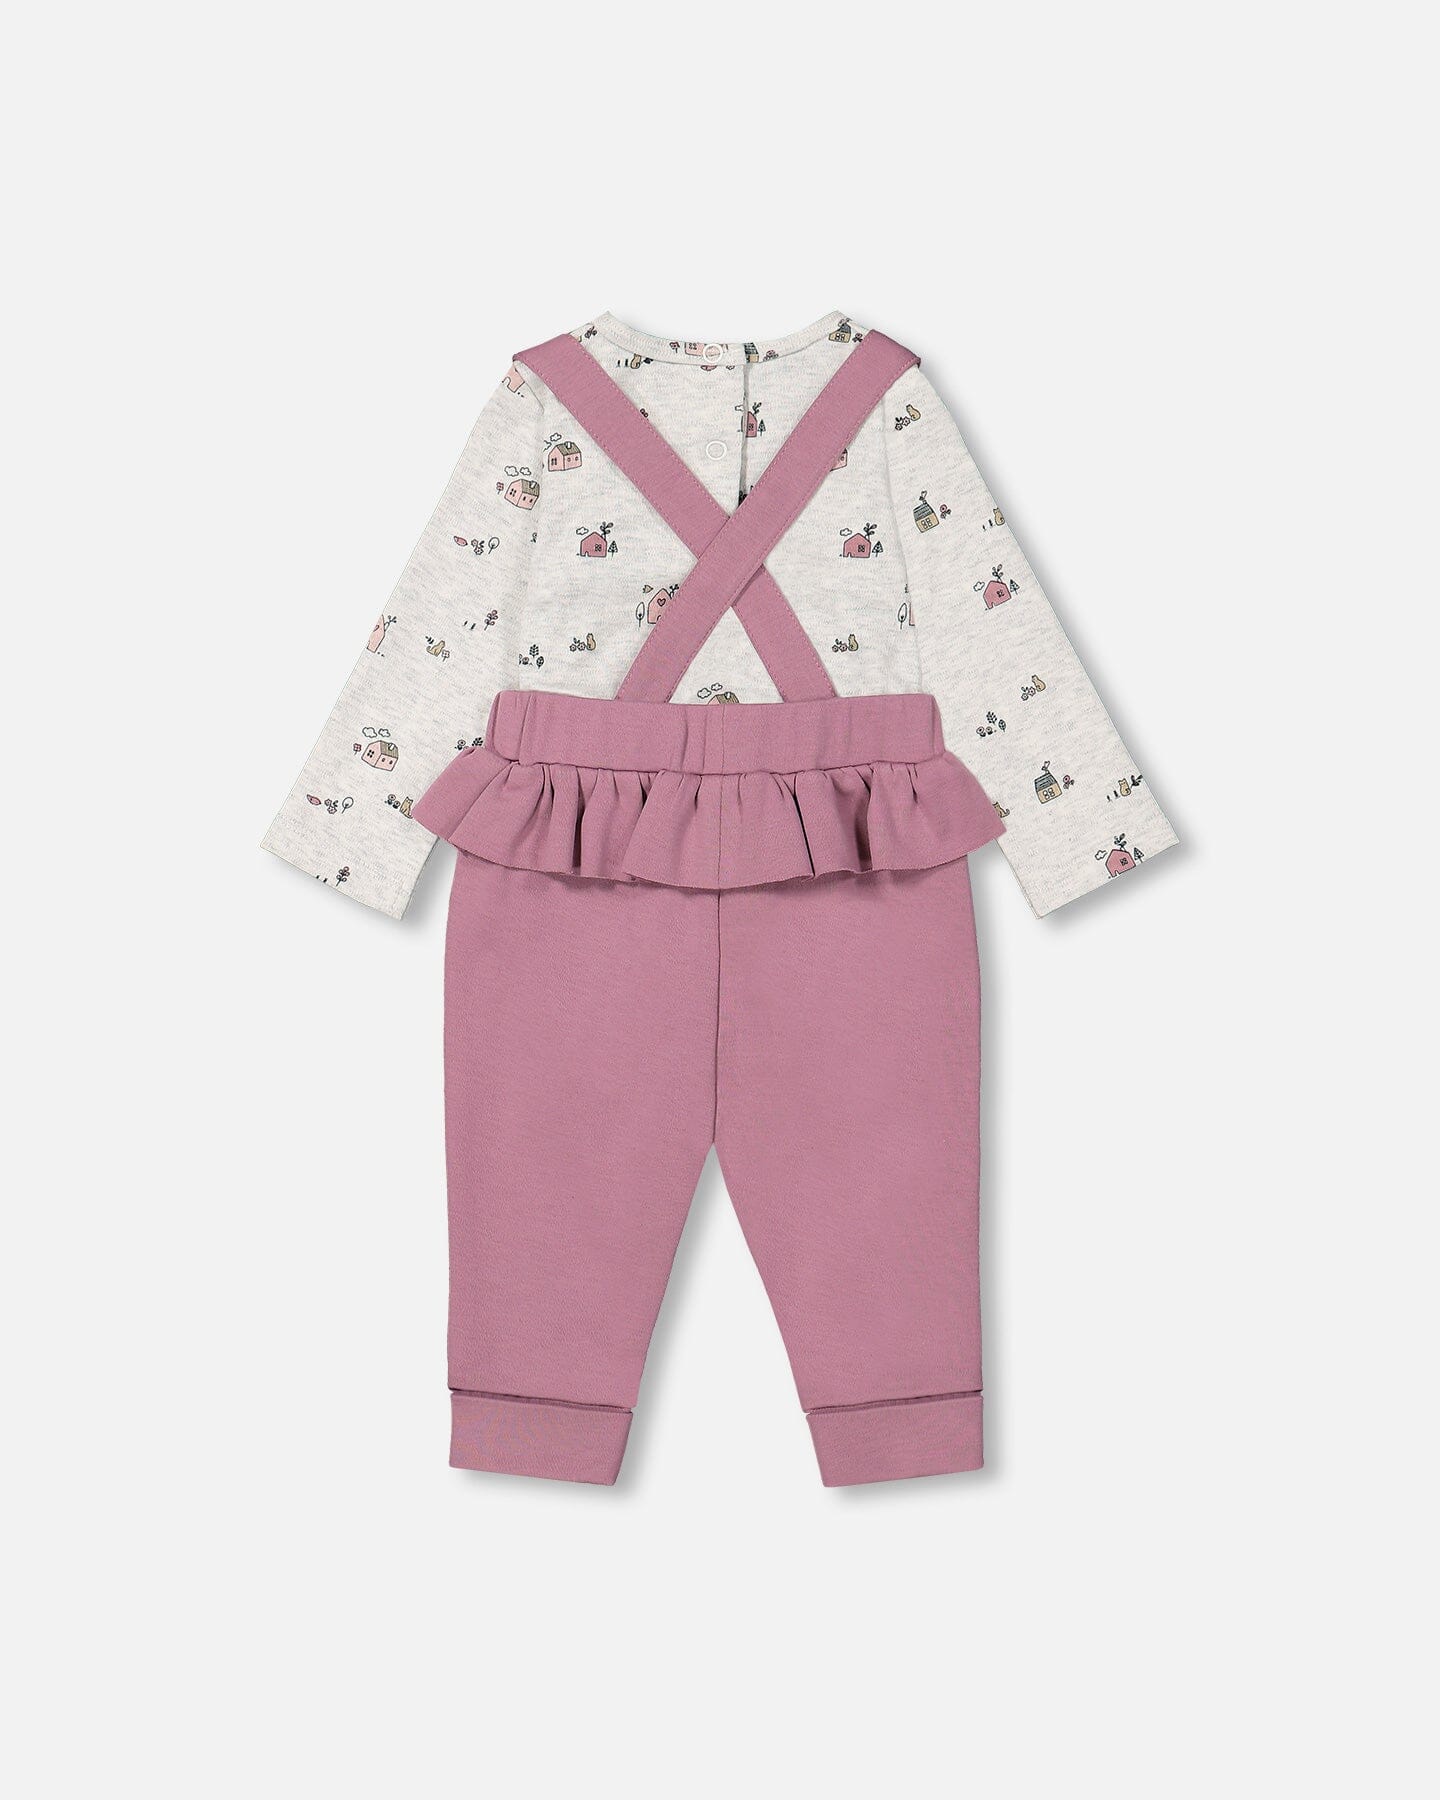 Organic Cotton Printed Onesie And Grow-With-Me Suspender Pant Set Mauve And Beige Little House Print - F20A12_041